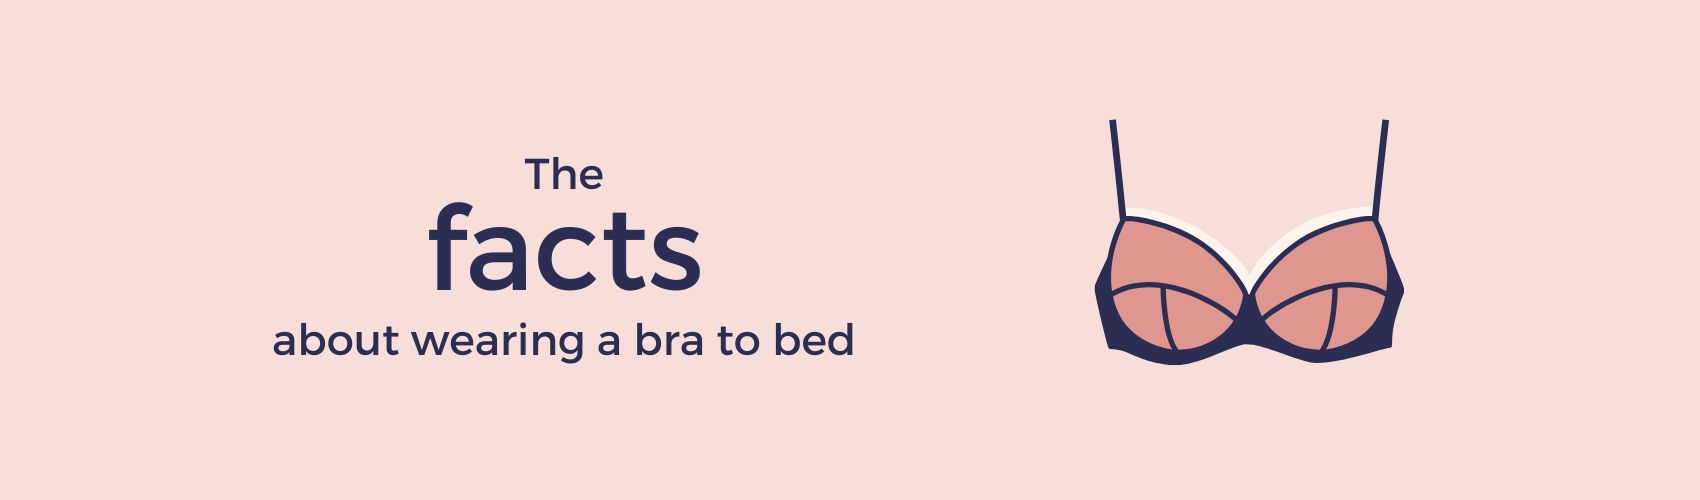 Facts about wearing a bra